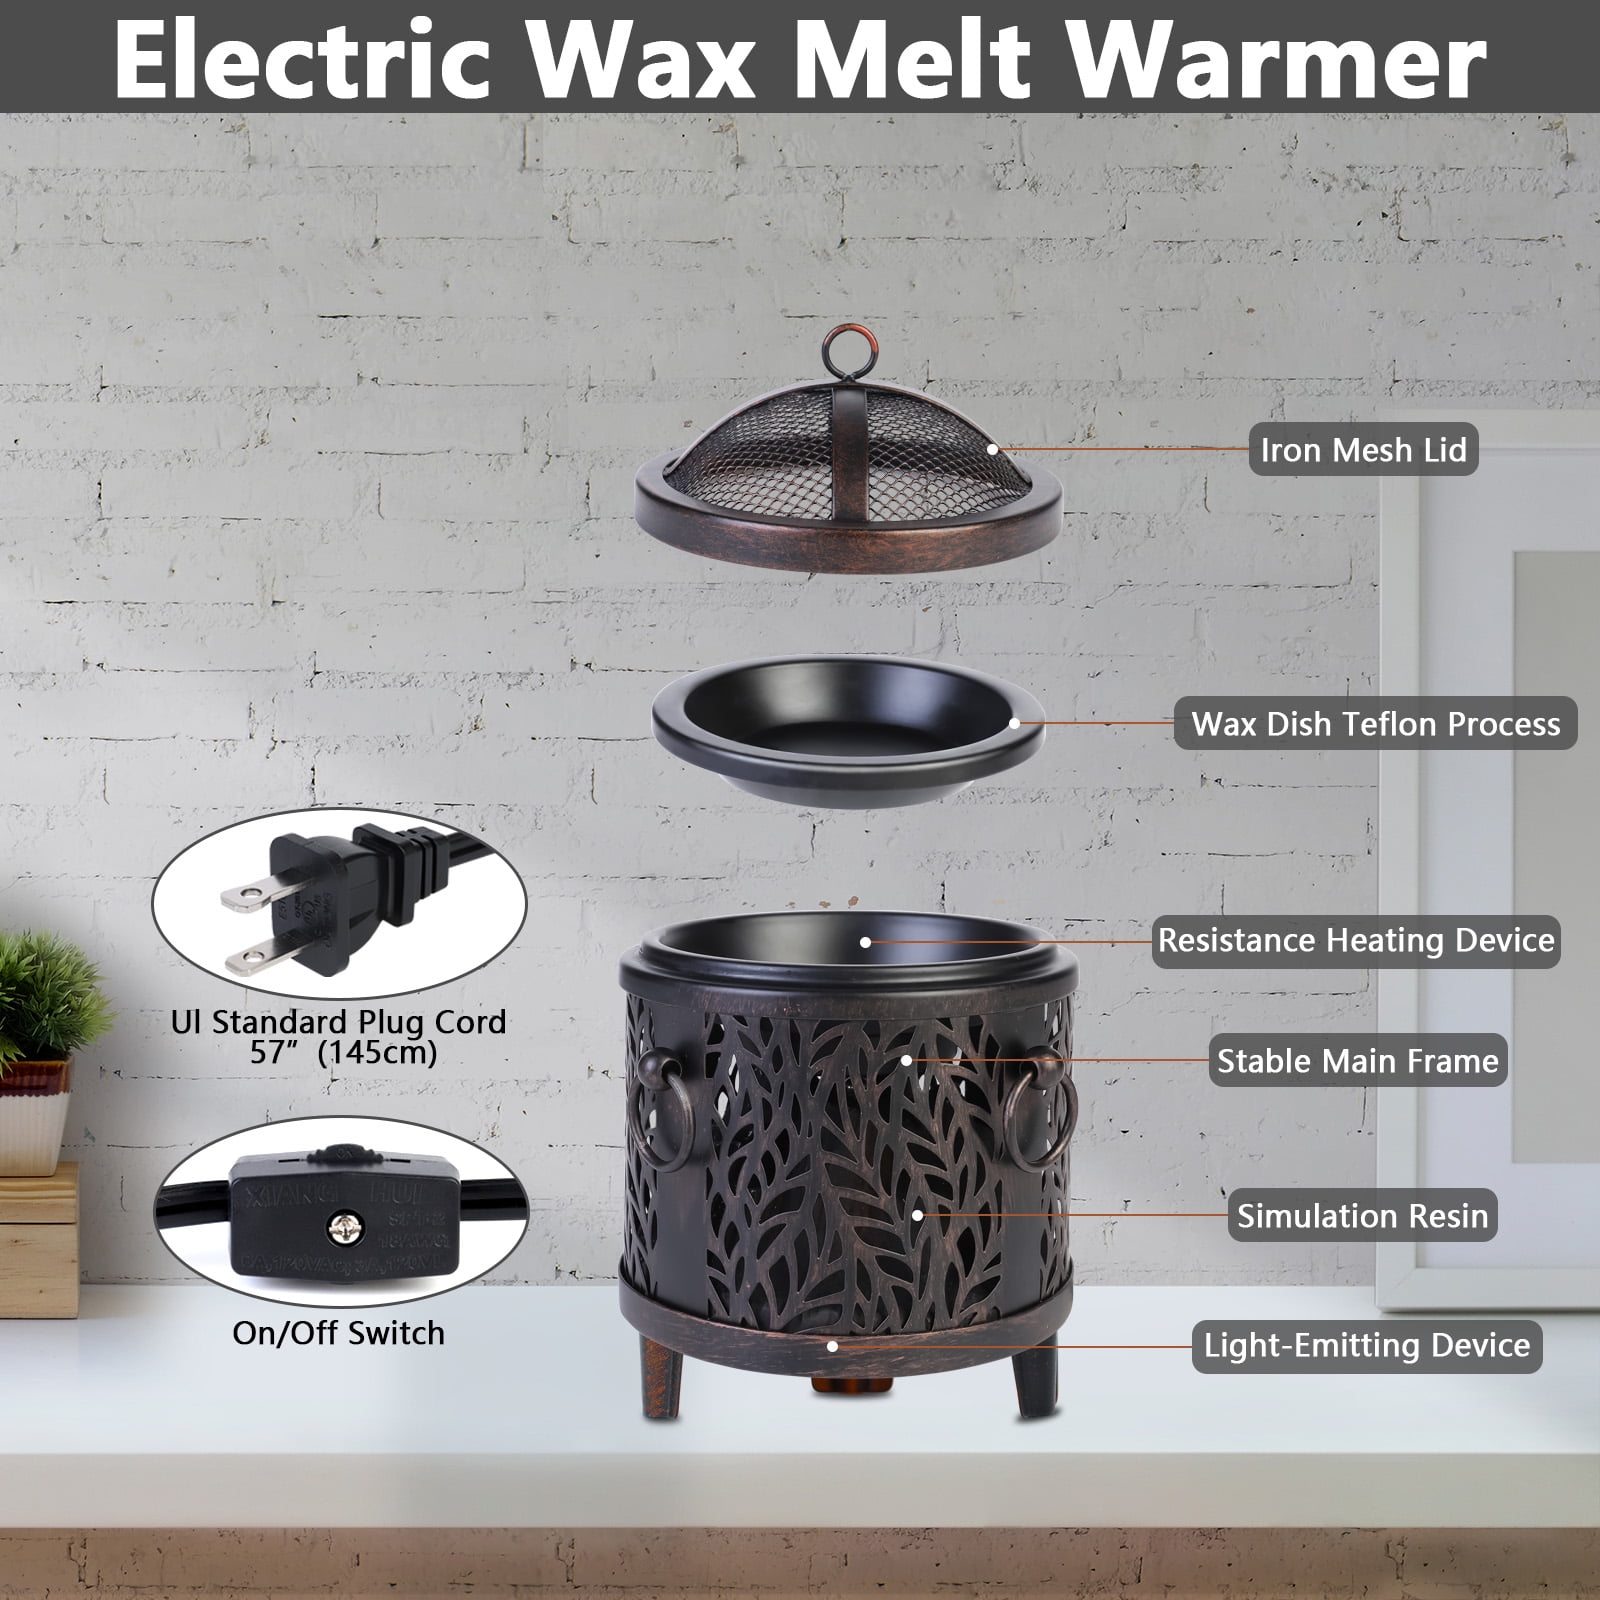 Wax Melt Warmer Burner Electric Fireplace Wax Warmer Essential Oil Burner  Scented Flame Light Fragrance Wax Melter Warmer with 4 Timer Auto Shut Off